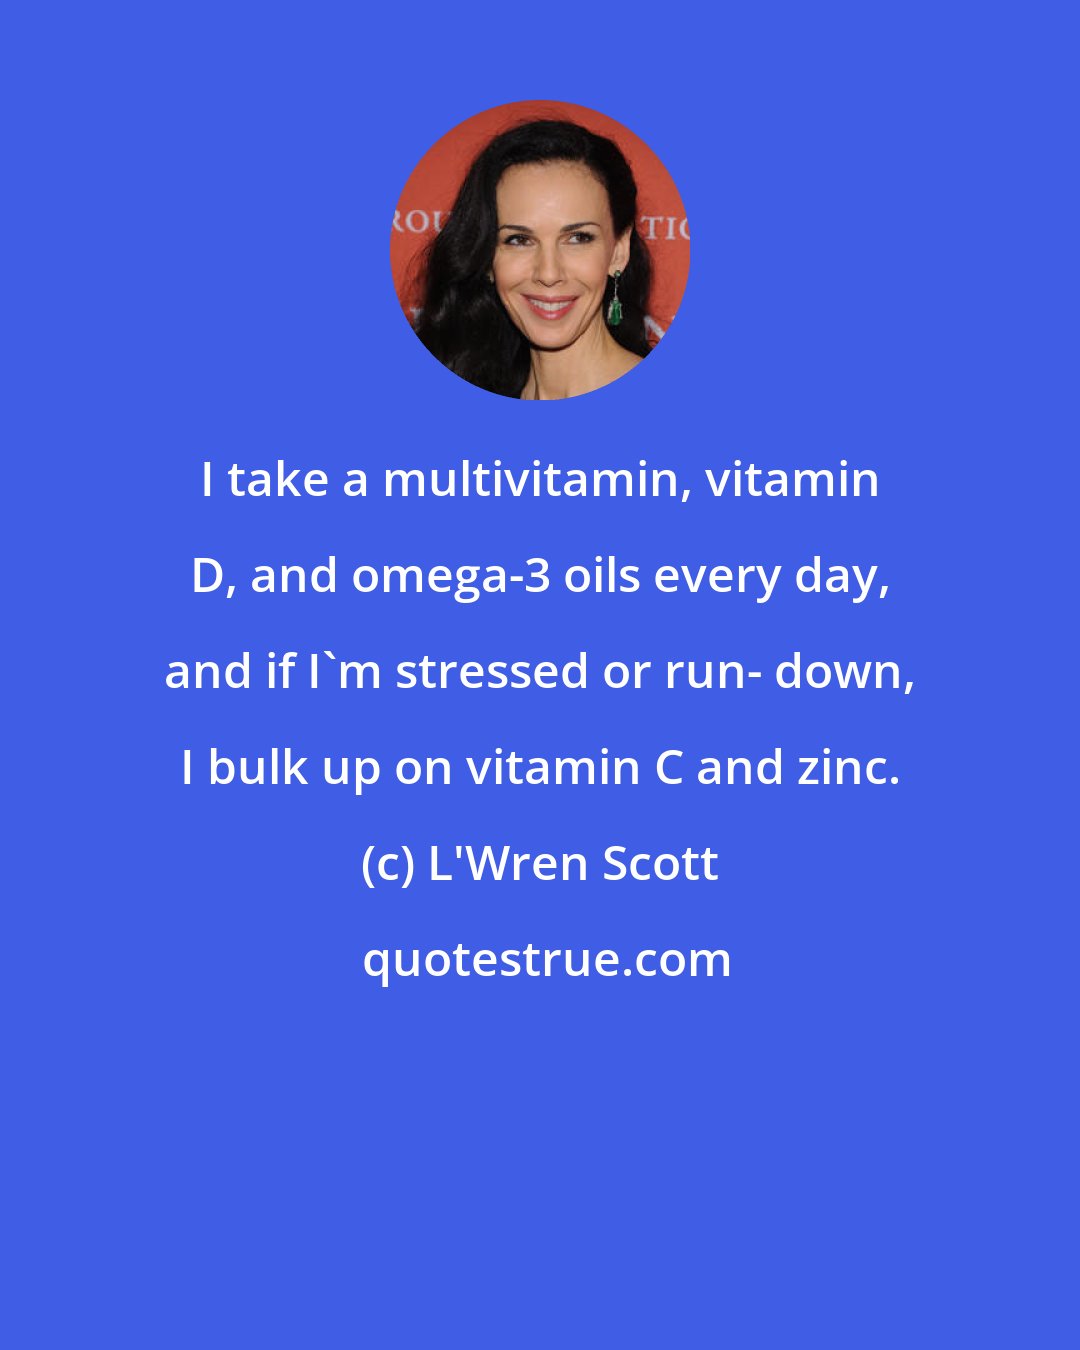 L'Wren Scott: I take a multivitamin, vitamin D, and omega-3 oils every day, and if I'm stressed or run- down, I bulk up on vitamin C and zinc.